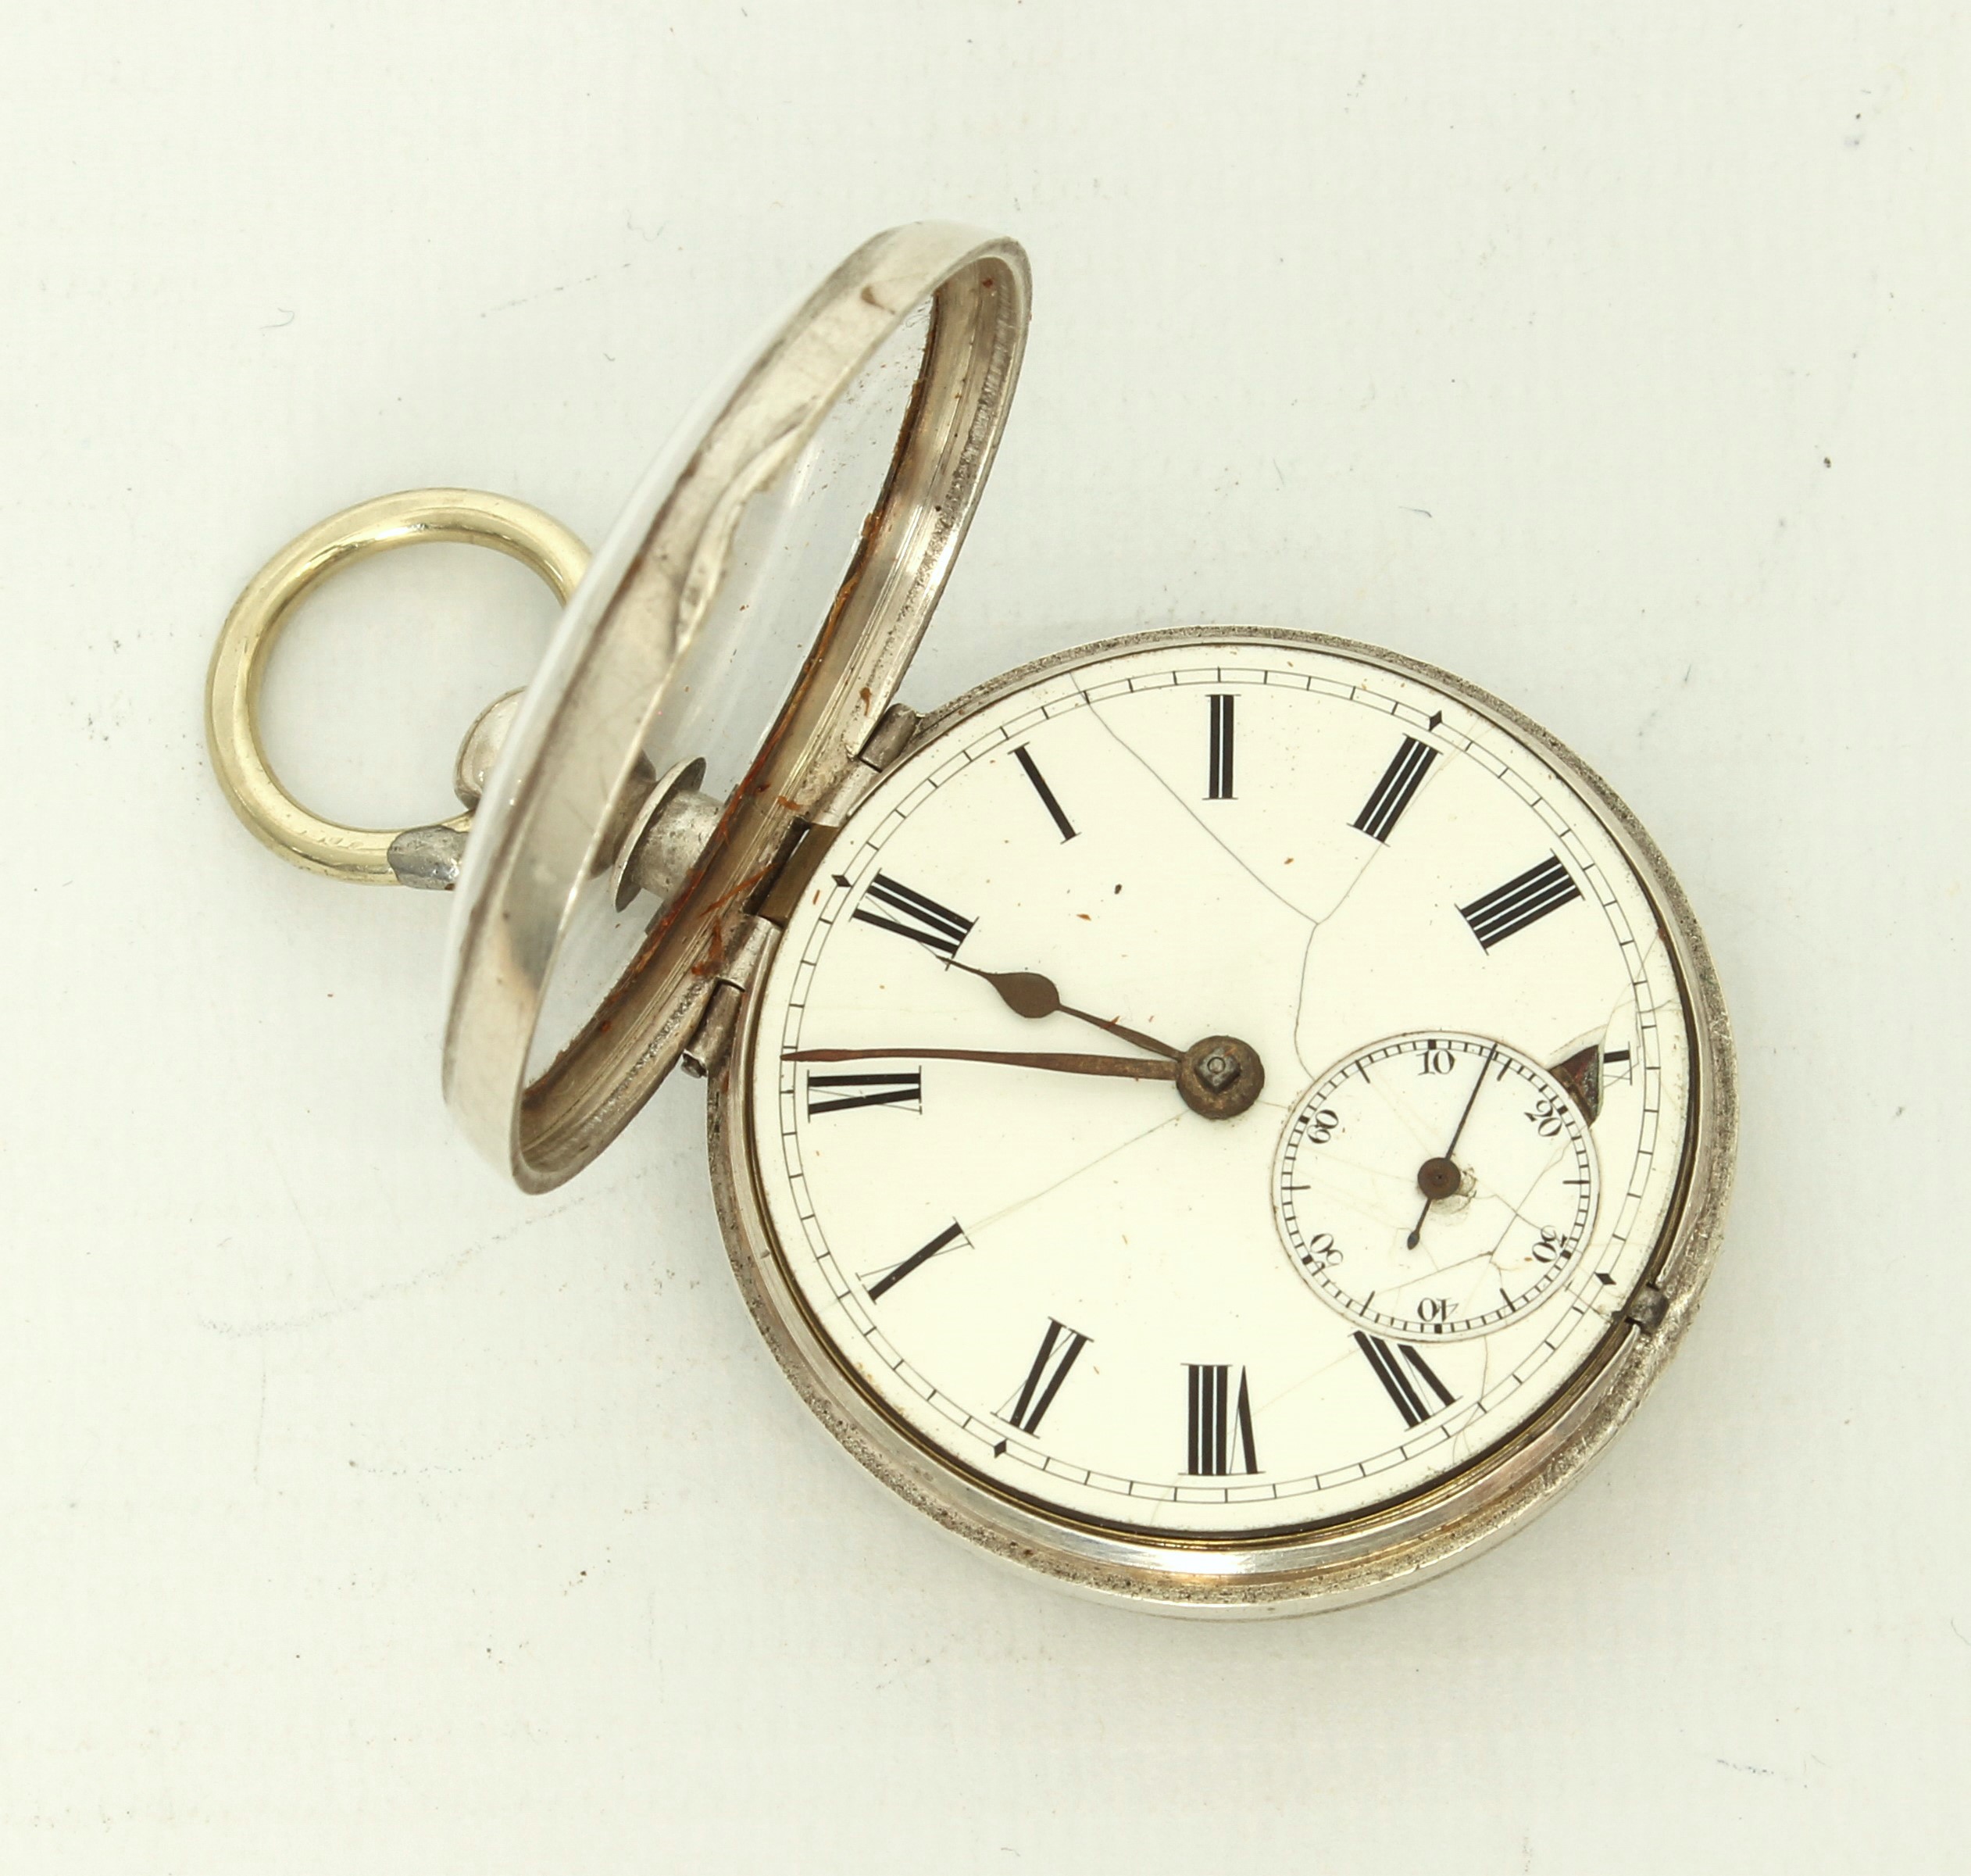 A silver-cased pocket watch with white-enamel dial, Roman numerals and subsidiary seconds dial, - Image 5 of 7